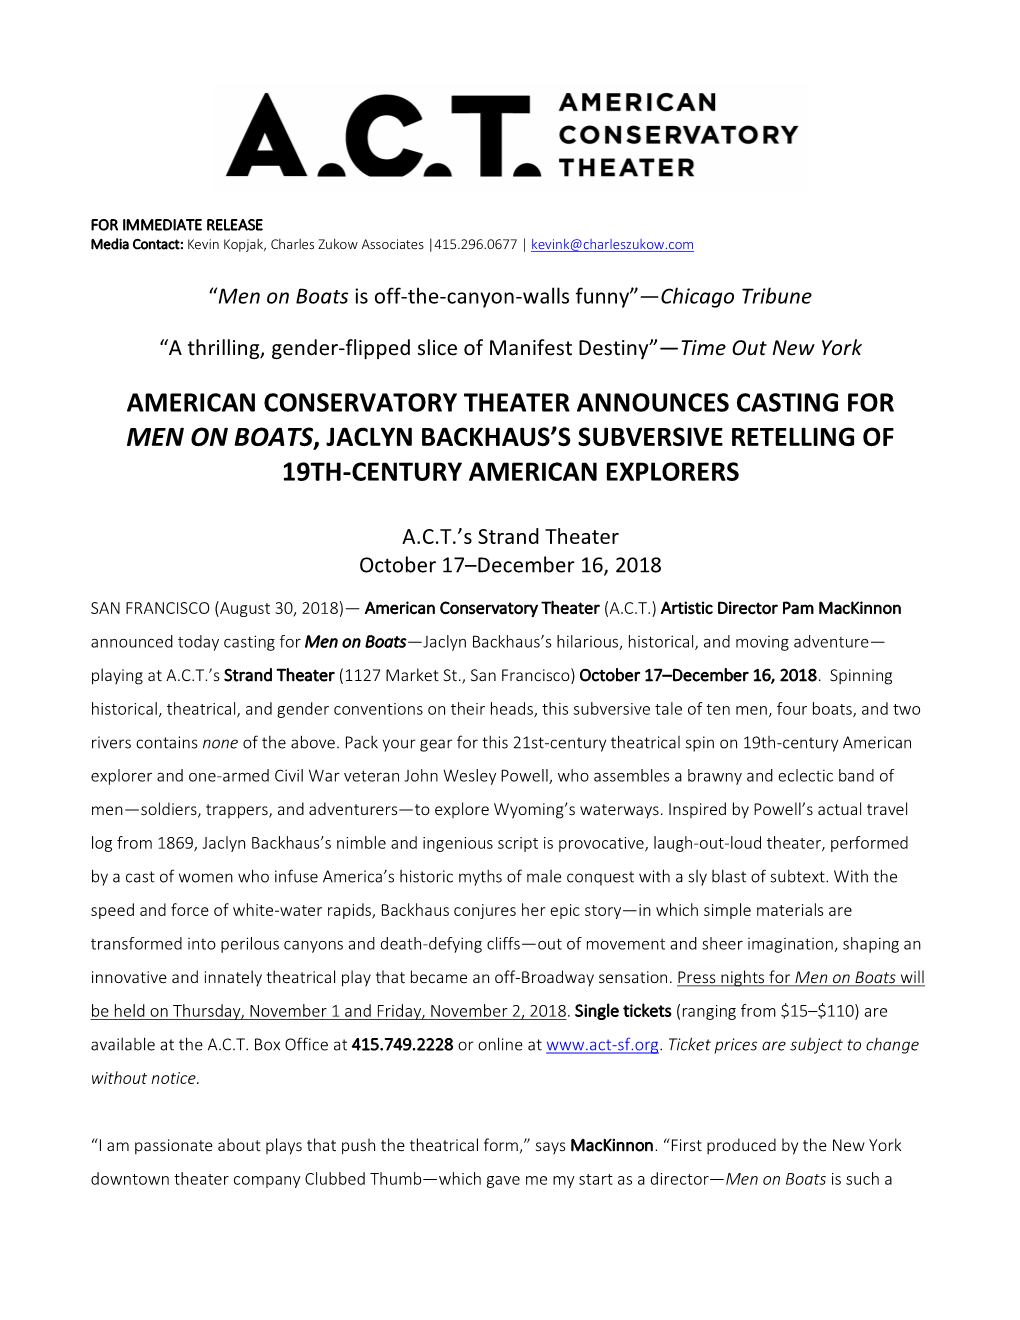 American Conservatory Theater Announces Casting for Men on Boats, Jaclyn Backhaus’S Subversive Retelling of 19Th-Century American Explorers